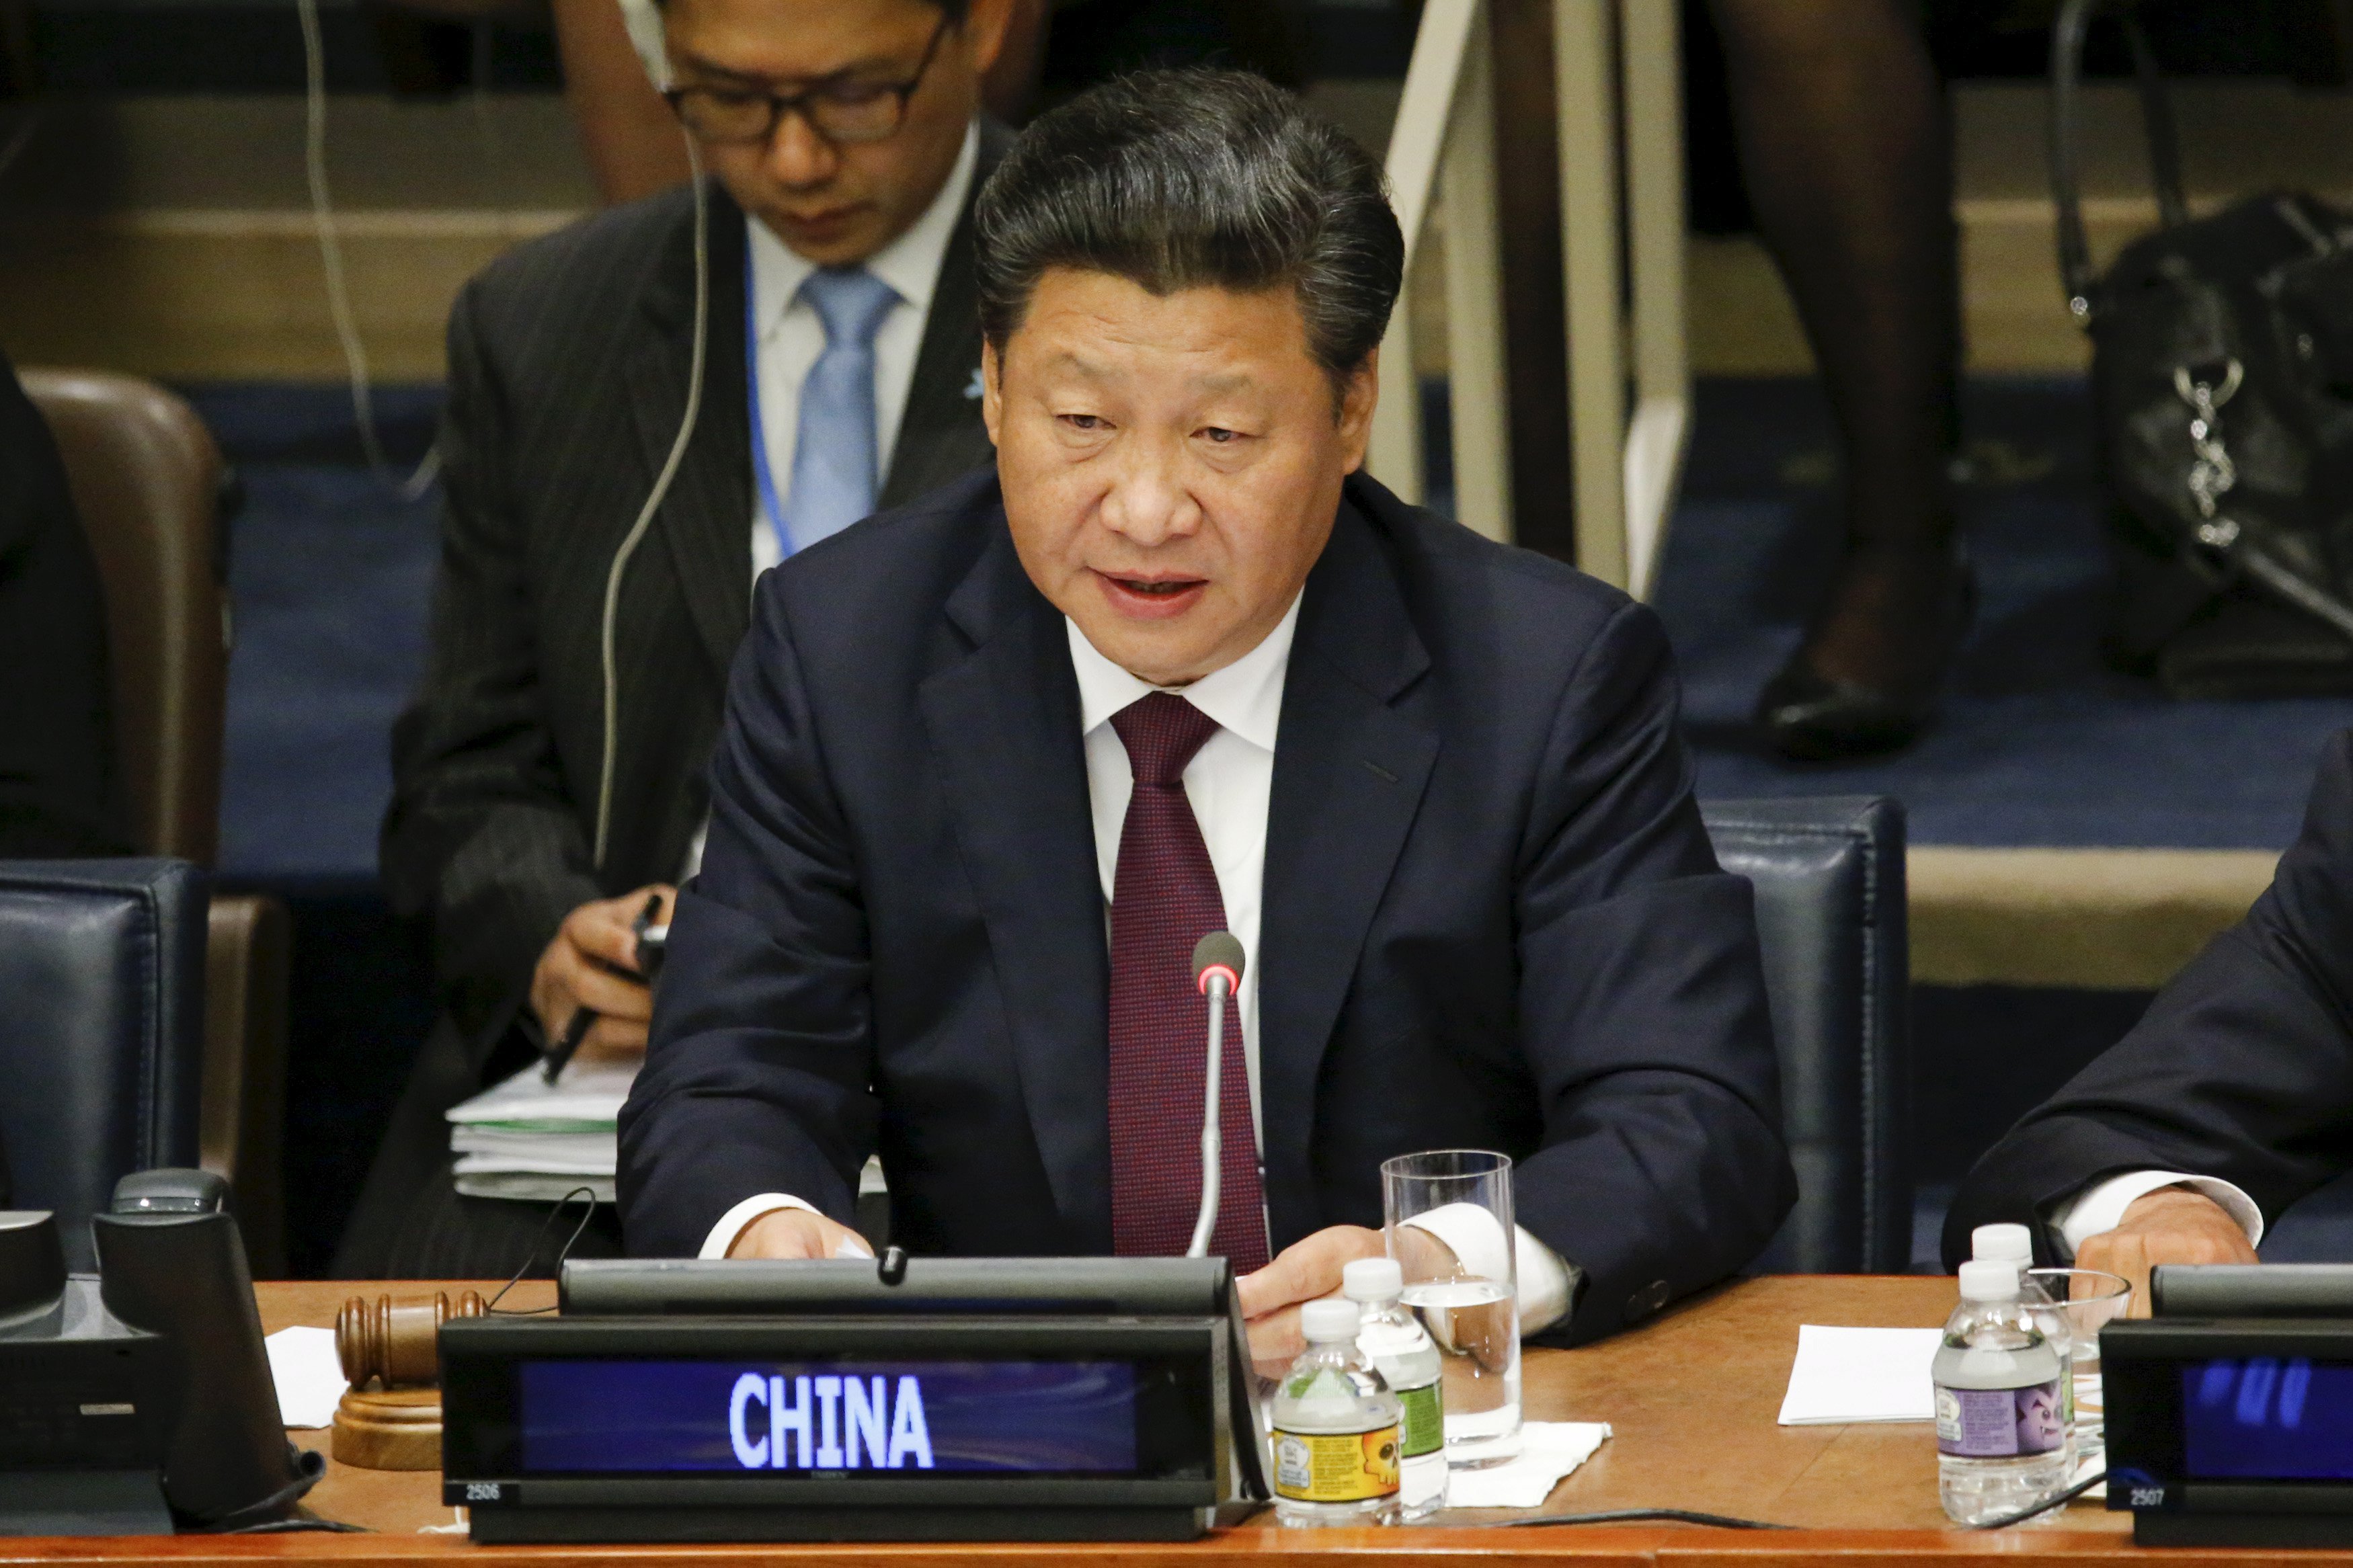 China's President Xi Jinping addresses a meeting on Gender Equality and Women's Empowerment at the United Nations headquarters in Manhattan. Photo: Reuters